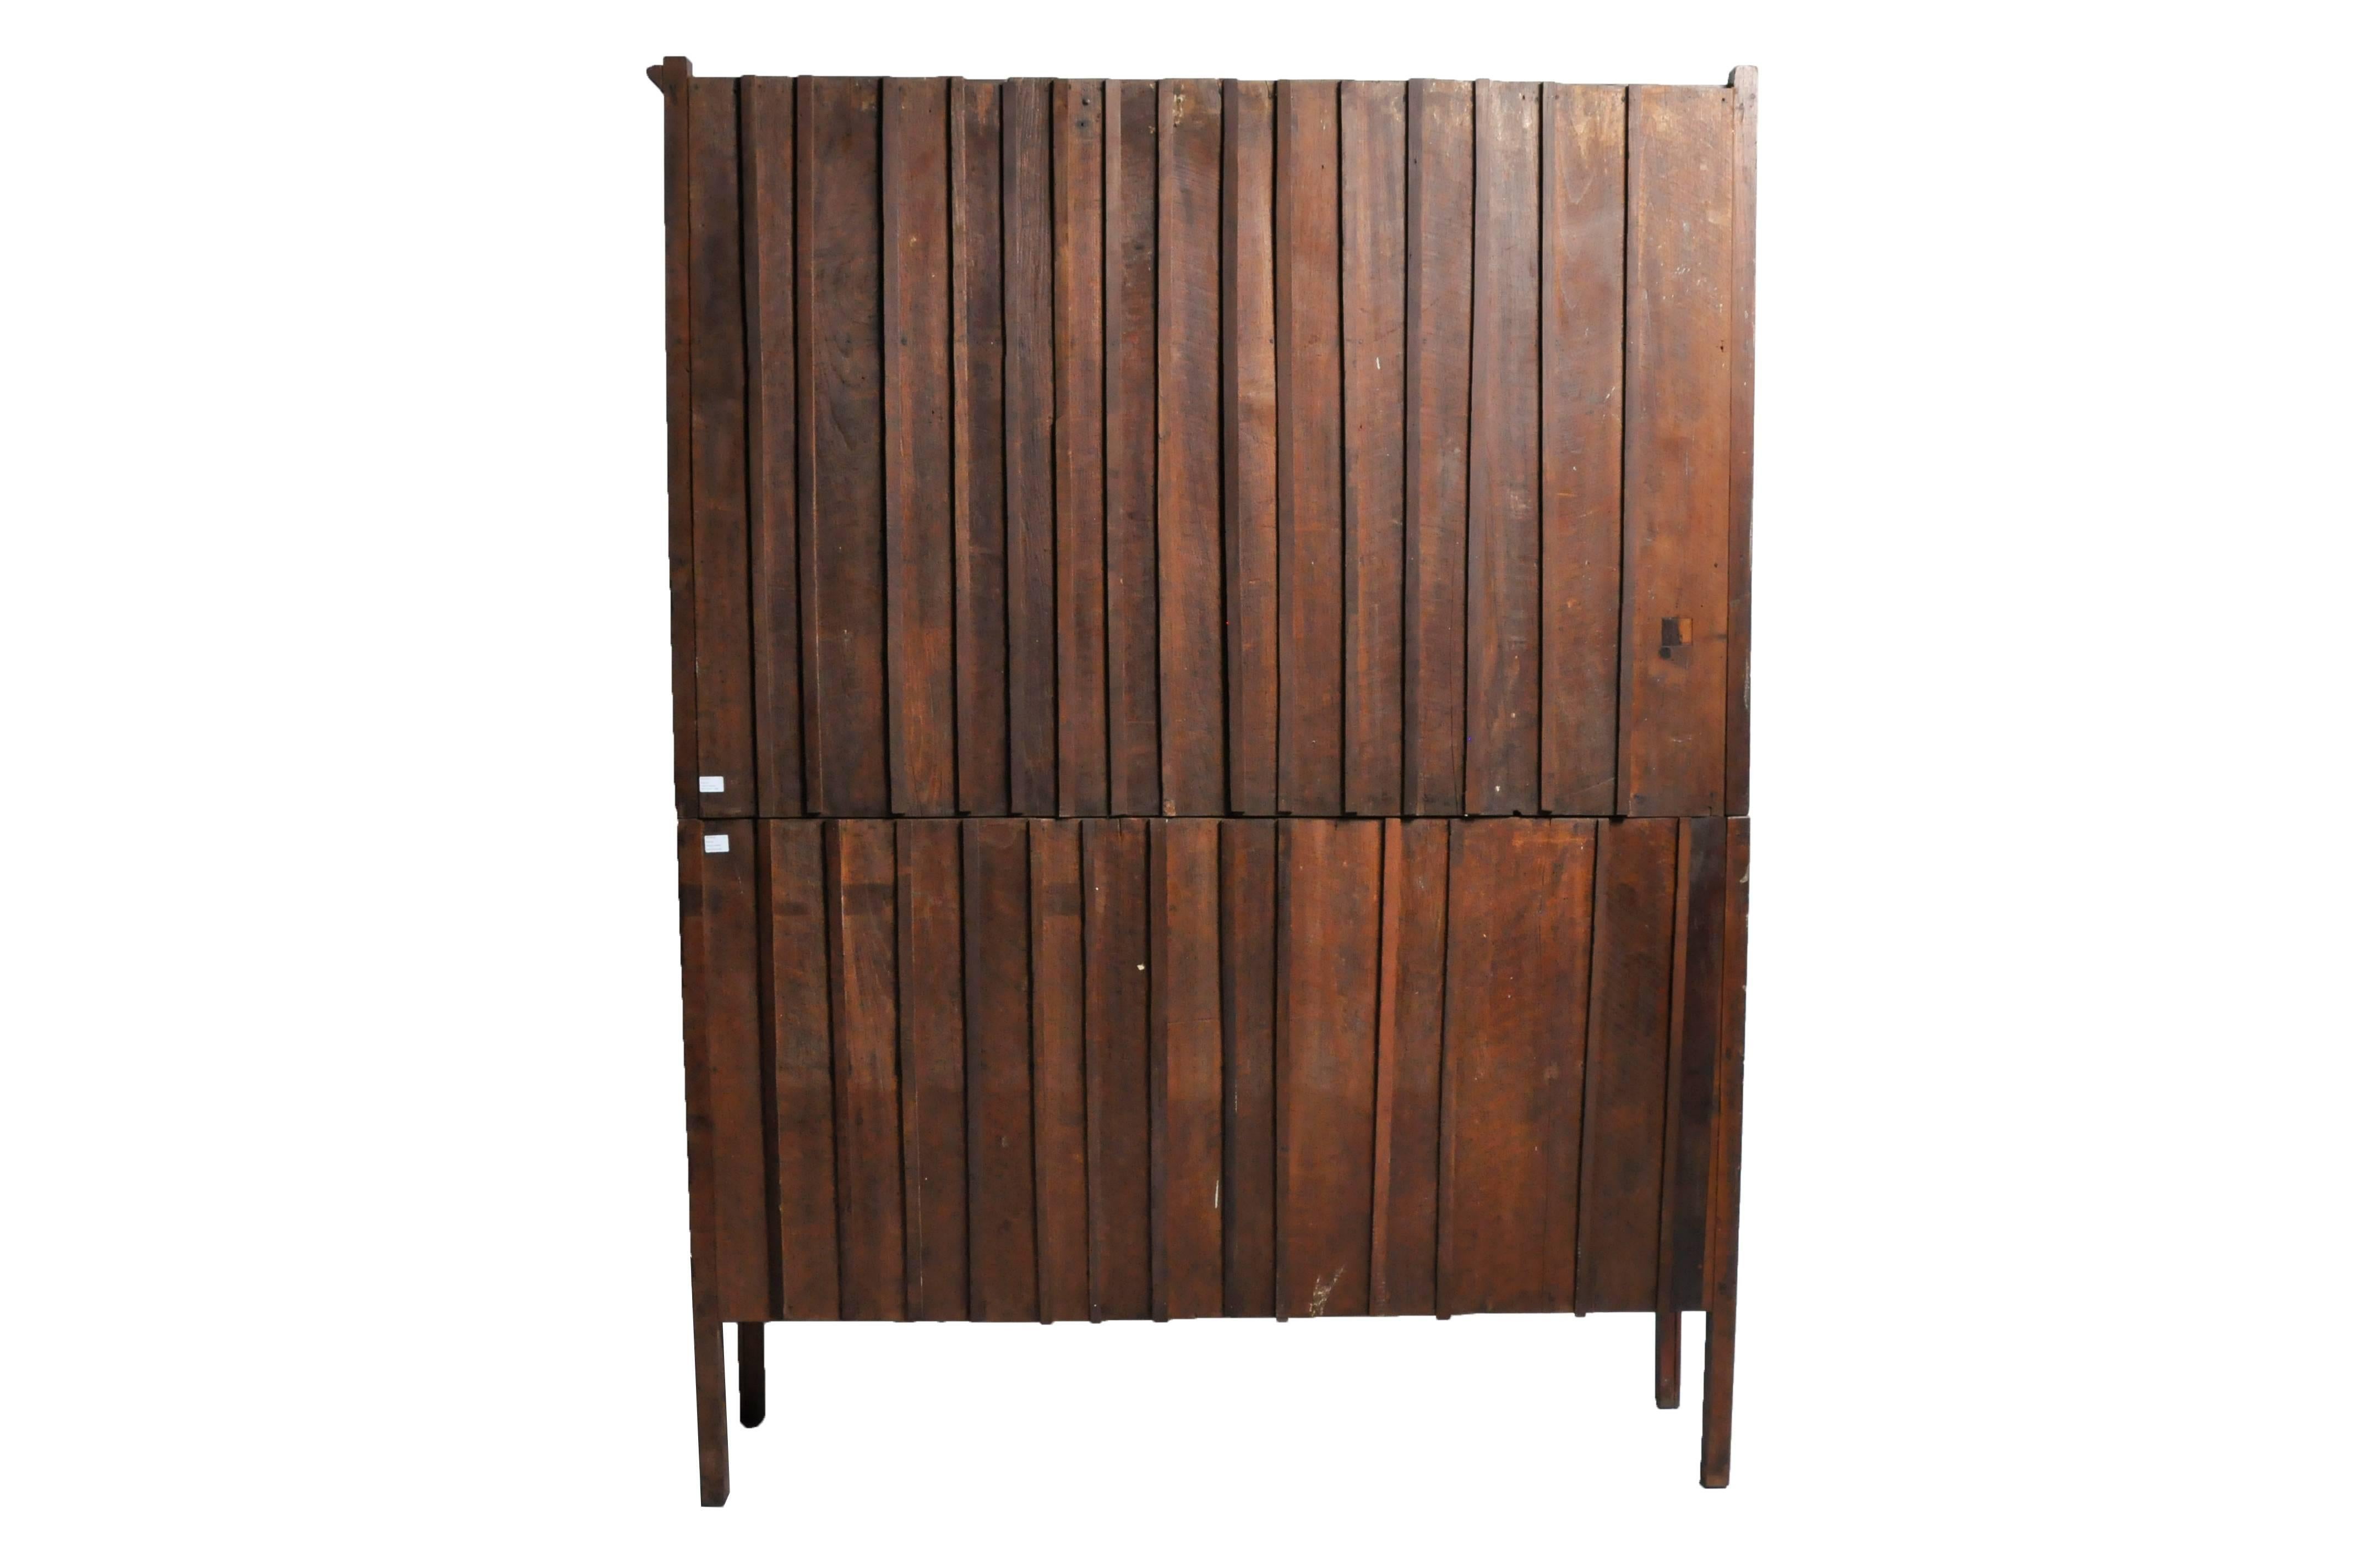 This handsome cabinet comes in two parts; both the top and bottom have two sets of glass panel doors that open to compartments lined with shelves. It's scale and ample storage make this a perfect book display for an office or library. Made from teak